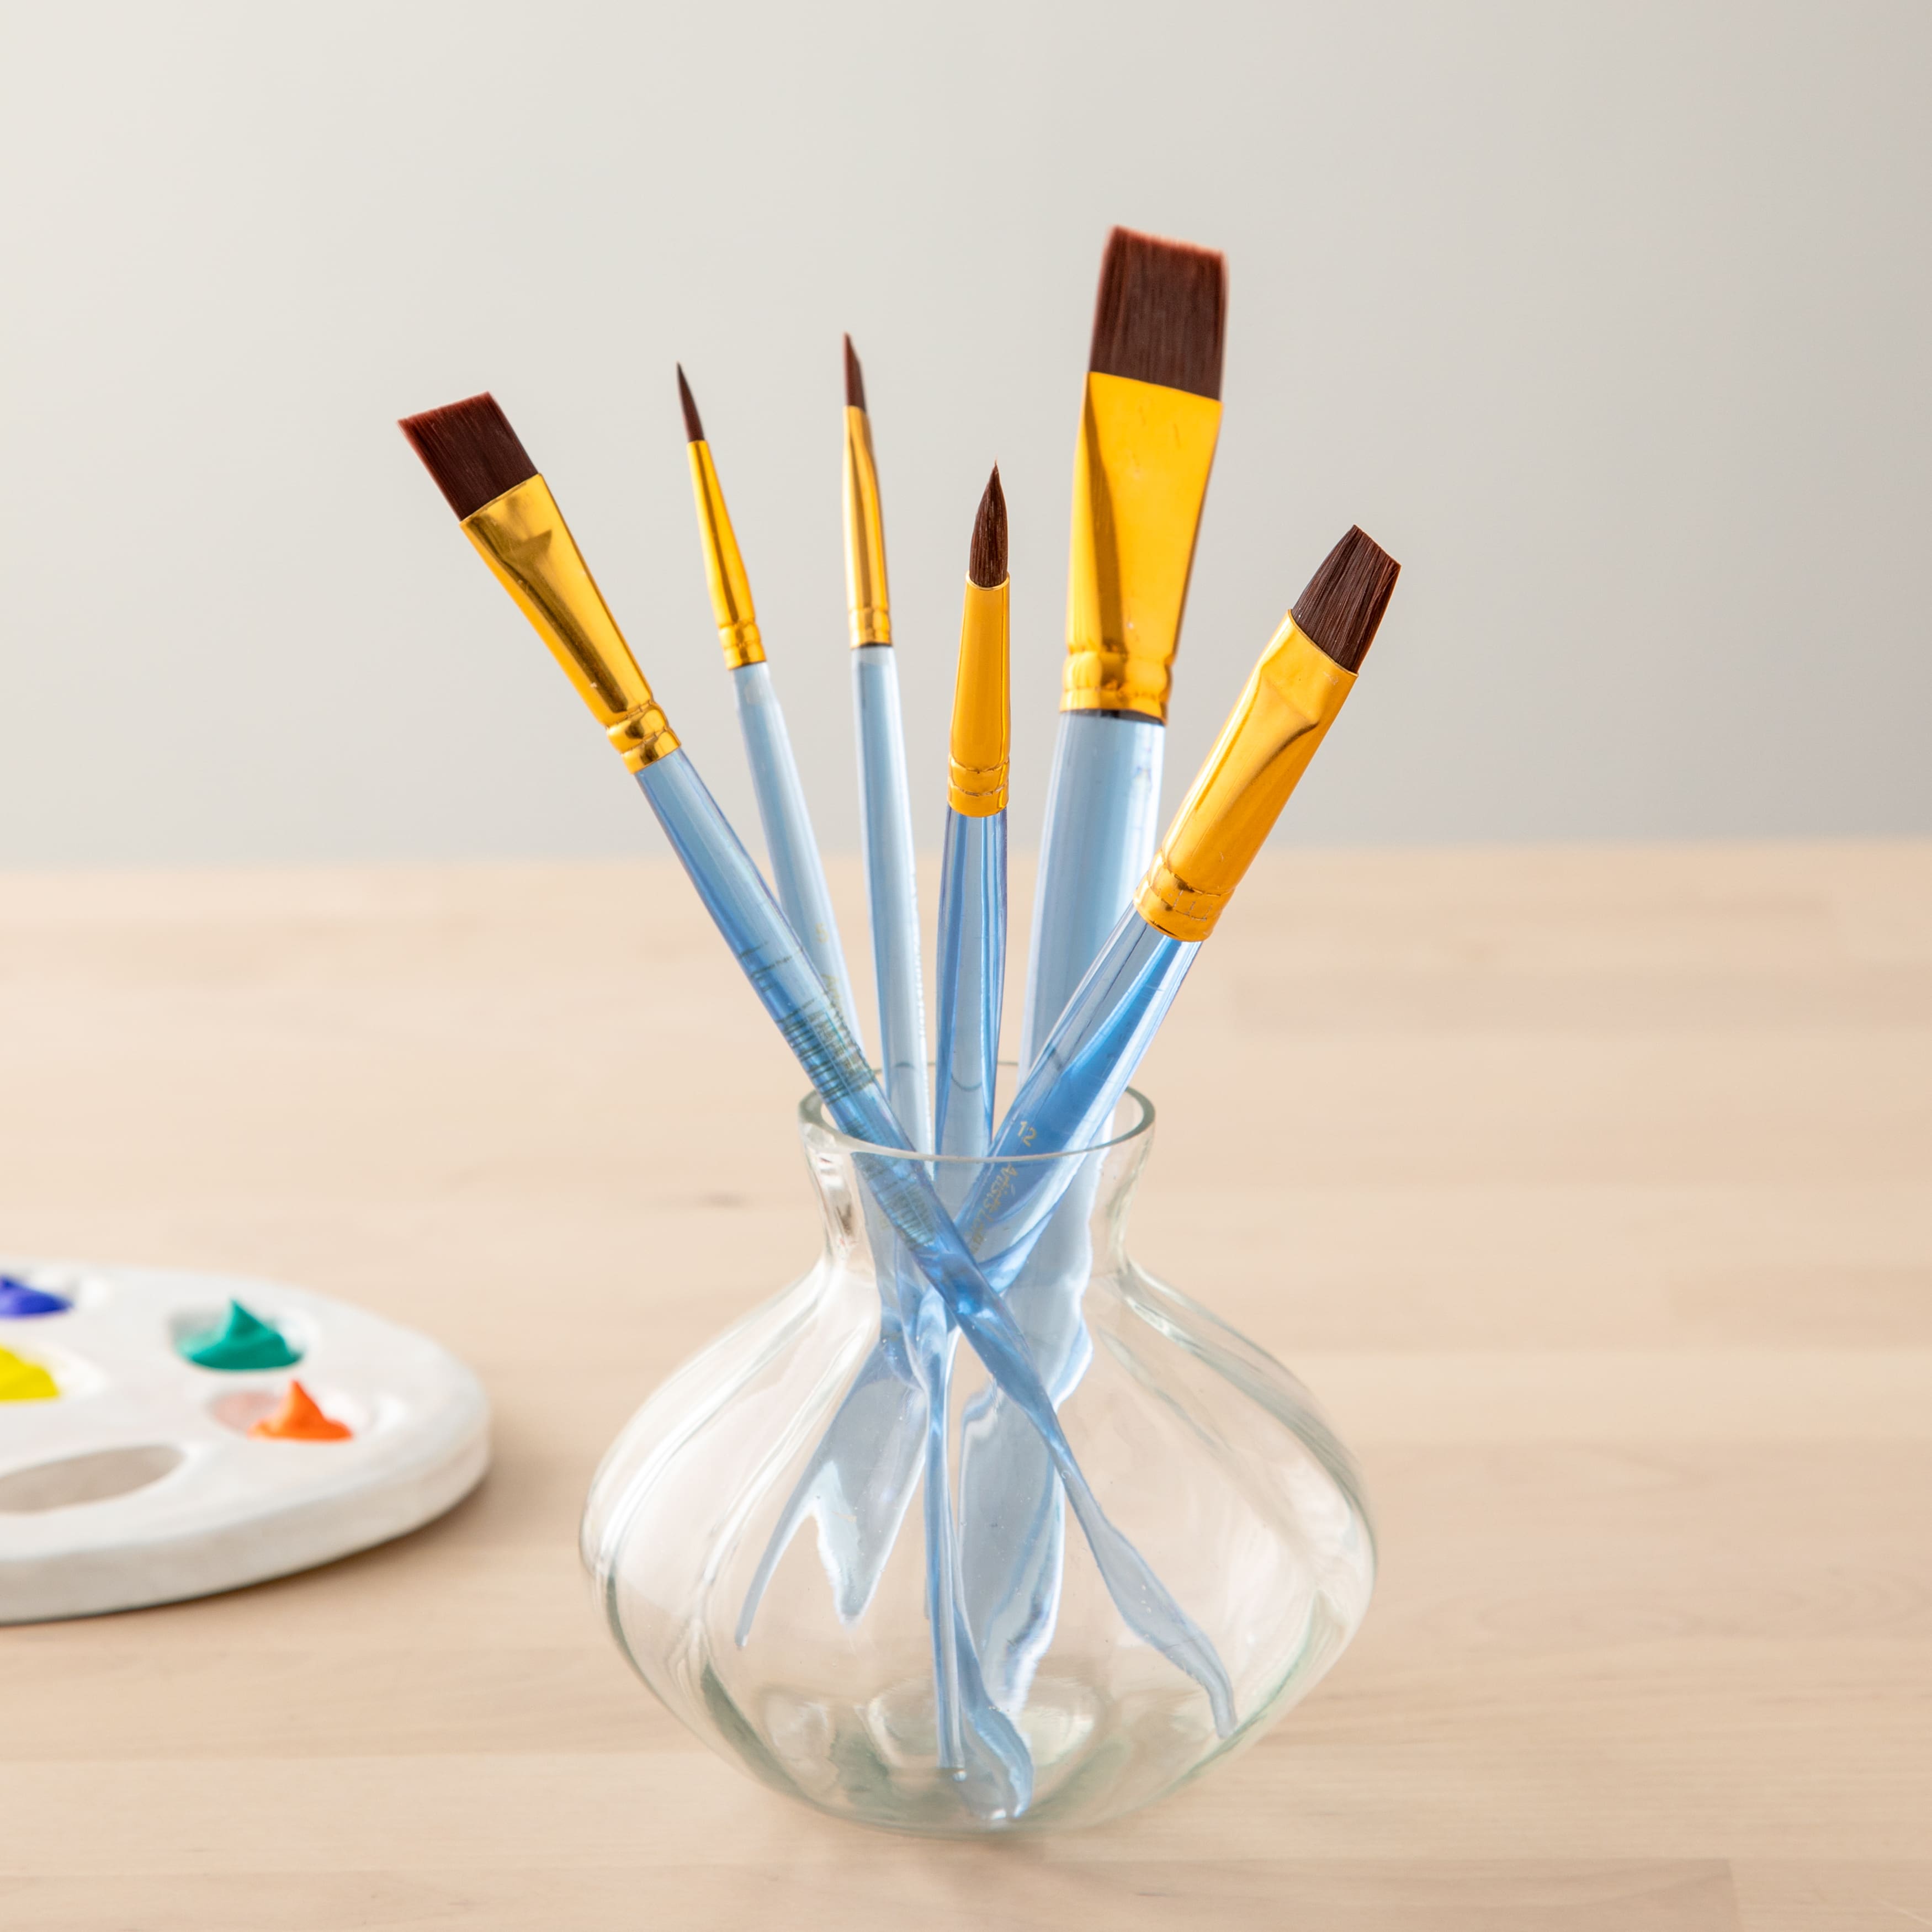 Necessities™ Brown Synthetic Acrylic Brush Set by Artist's Loft